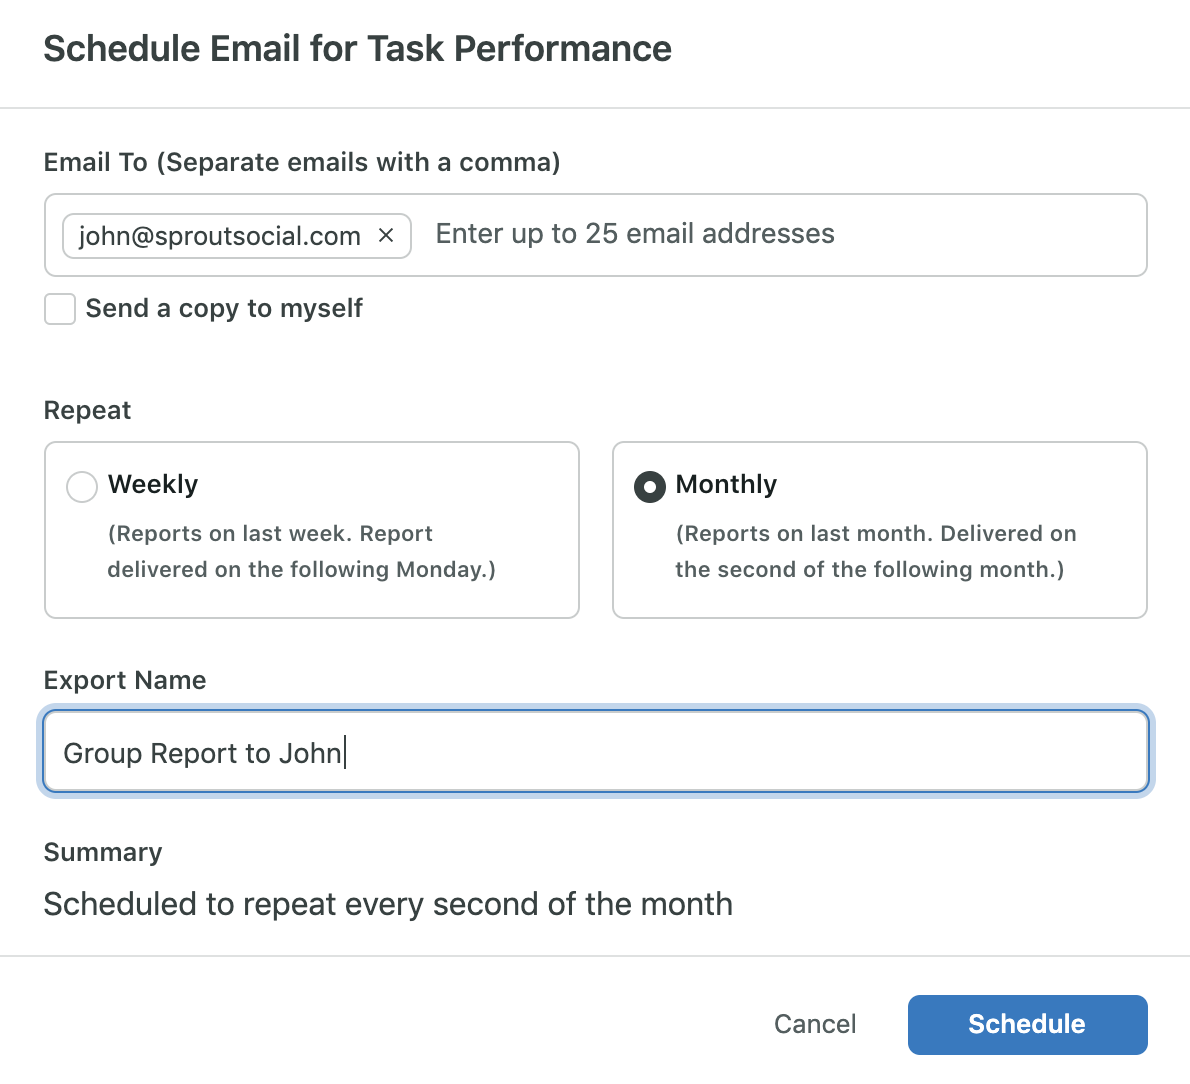 The Schedule Email for Task Performance dialogue box in Sprout Social, which allows users to automate report distribution to up to 25 email addresses. 